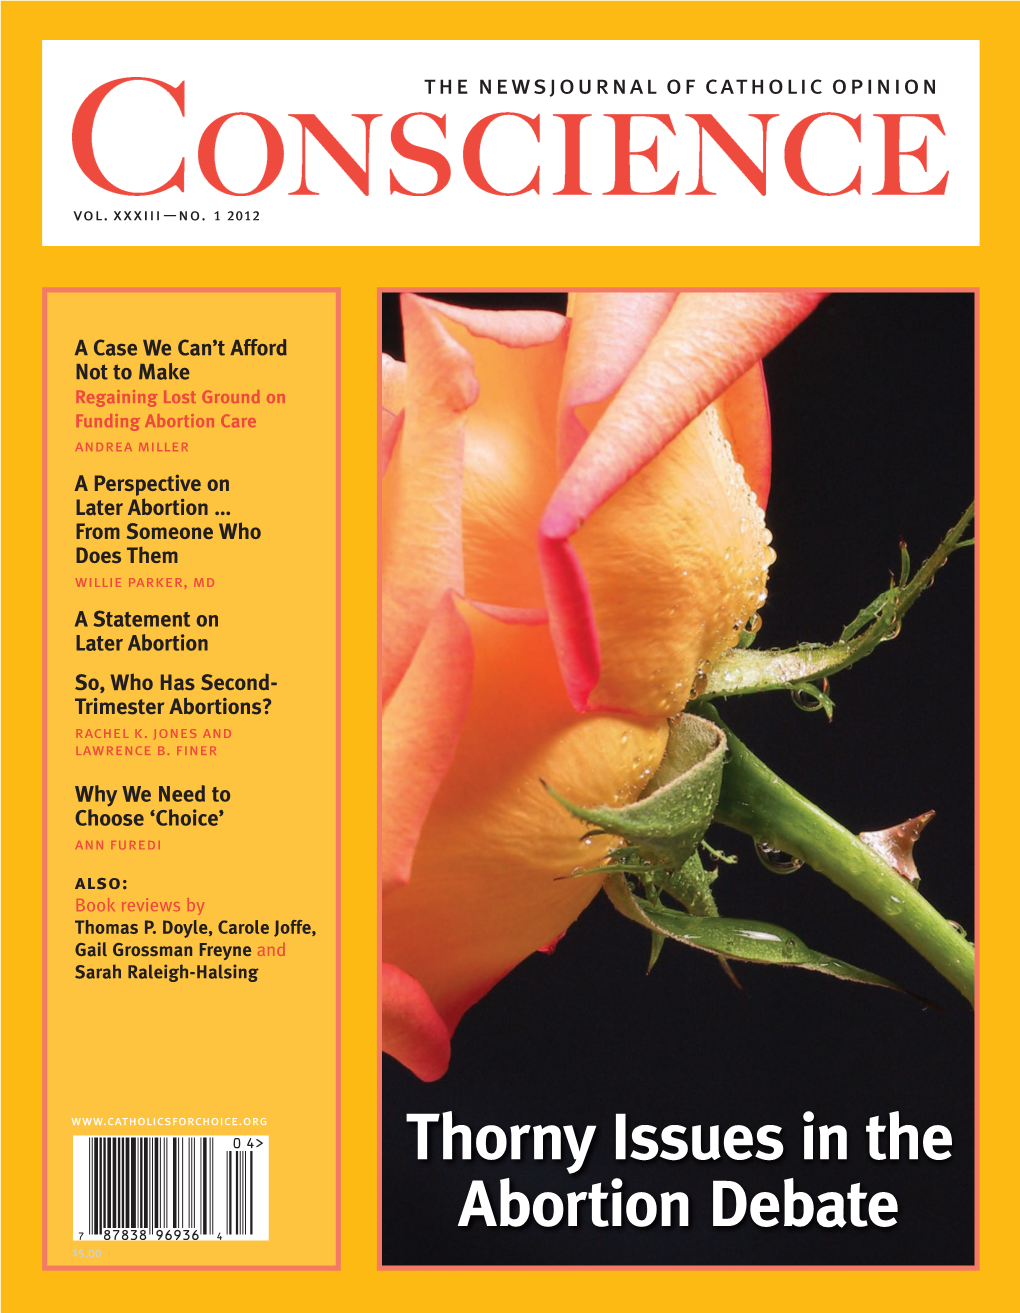 Thorny Issues in the Abortion Debate $5.00 “He Who Acts Against His Conscience Always Sins.” — St